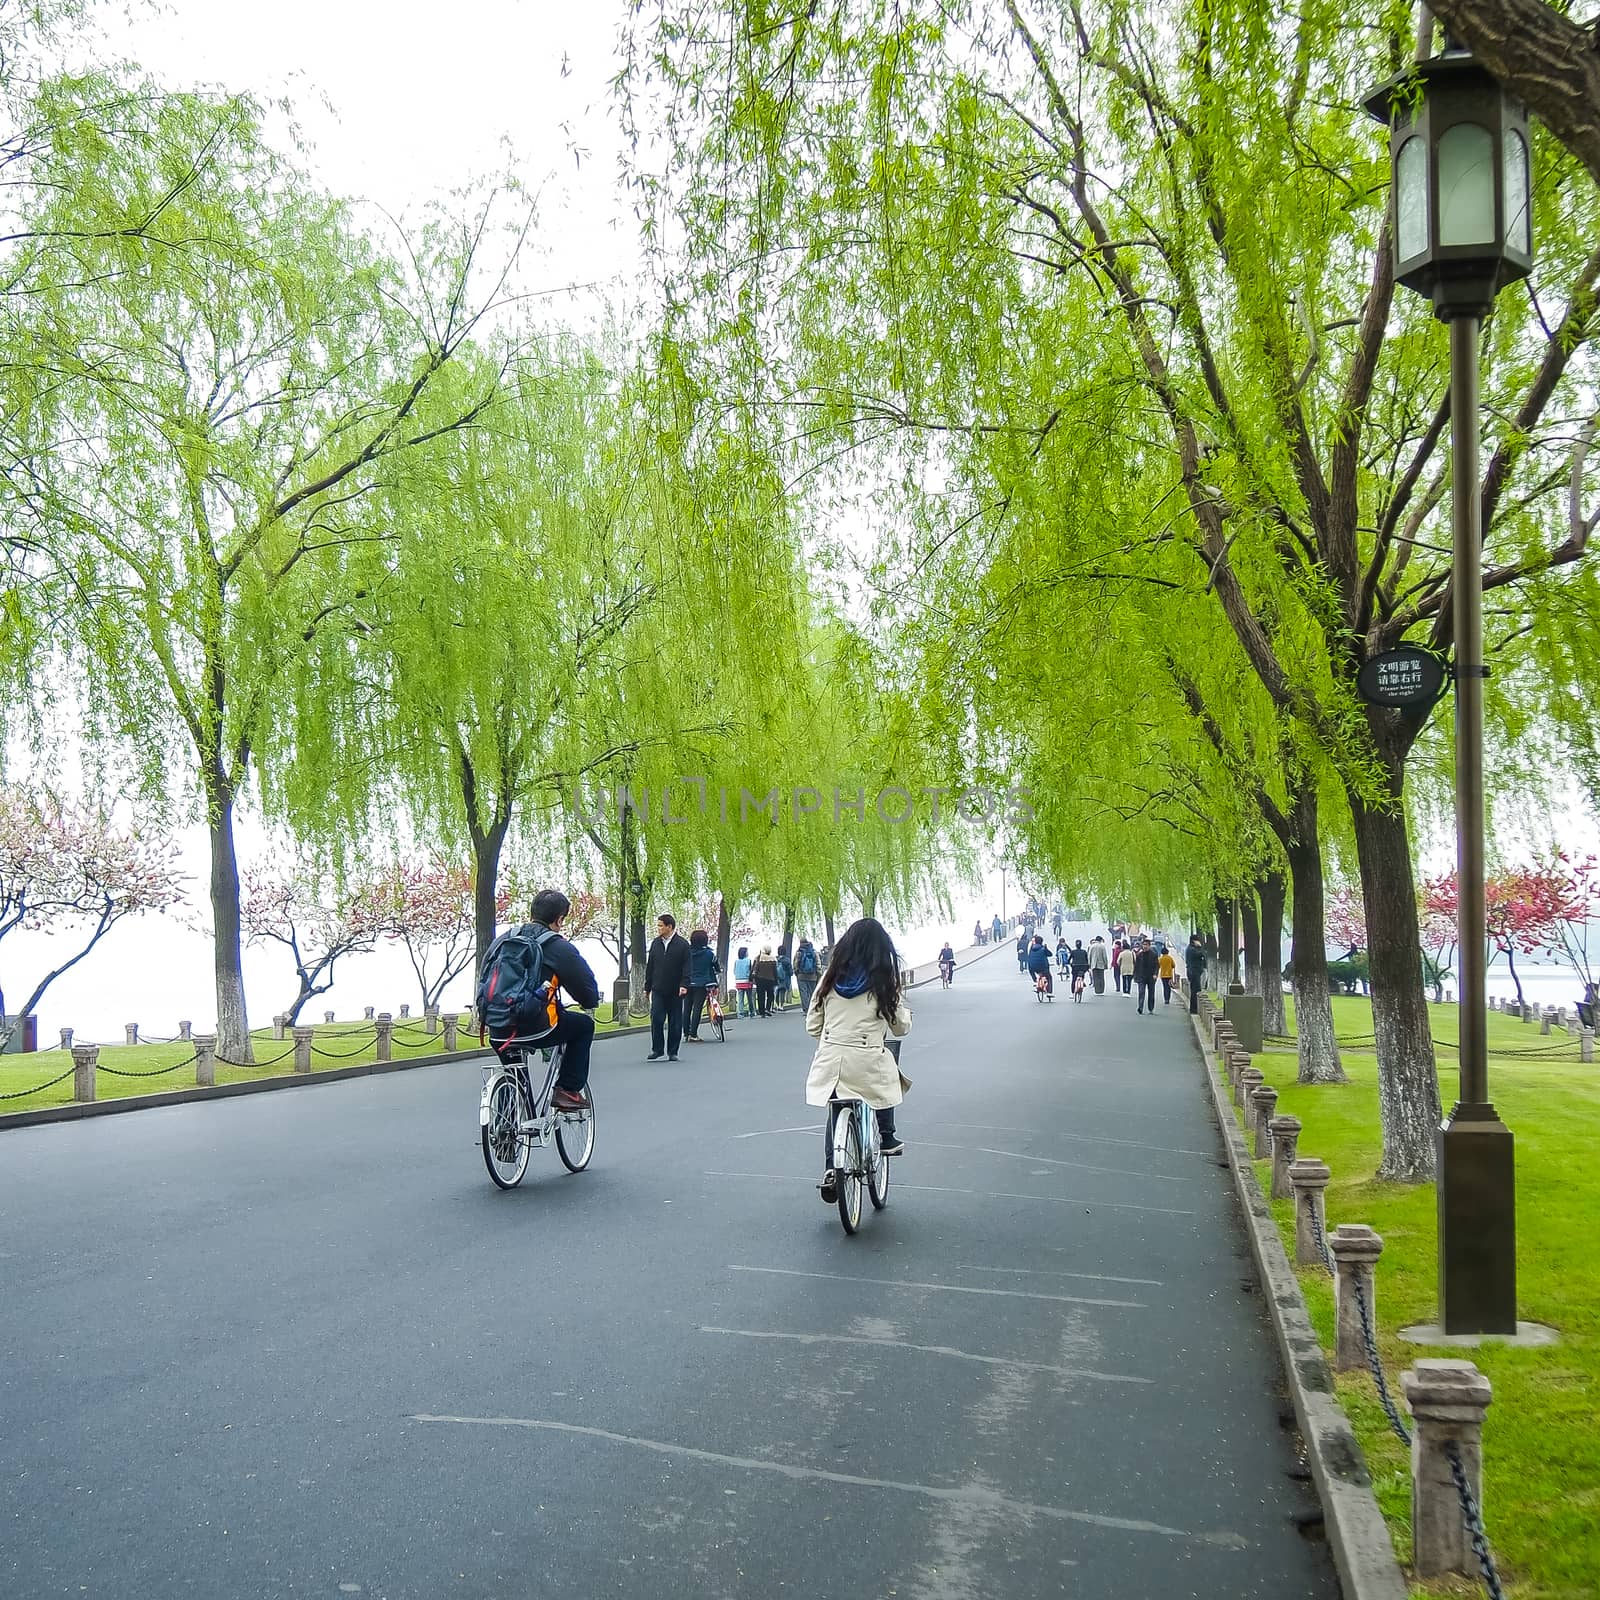 HANGZHOU, CHINA - April 13, 2011 : View in the mist of Xihu, the west lake in hangzhou china, this is image of Chinese couple cycling ,ride the bike in the park